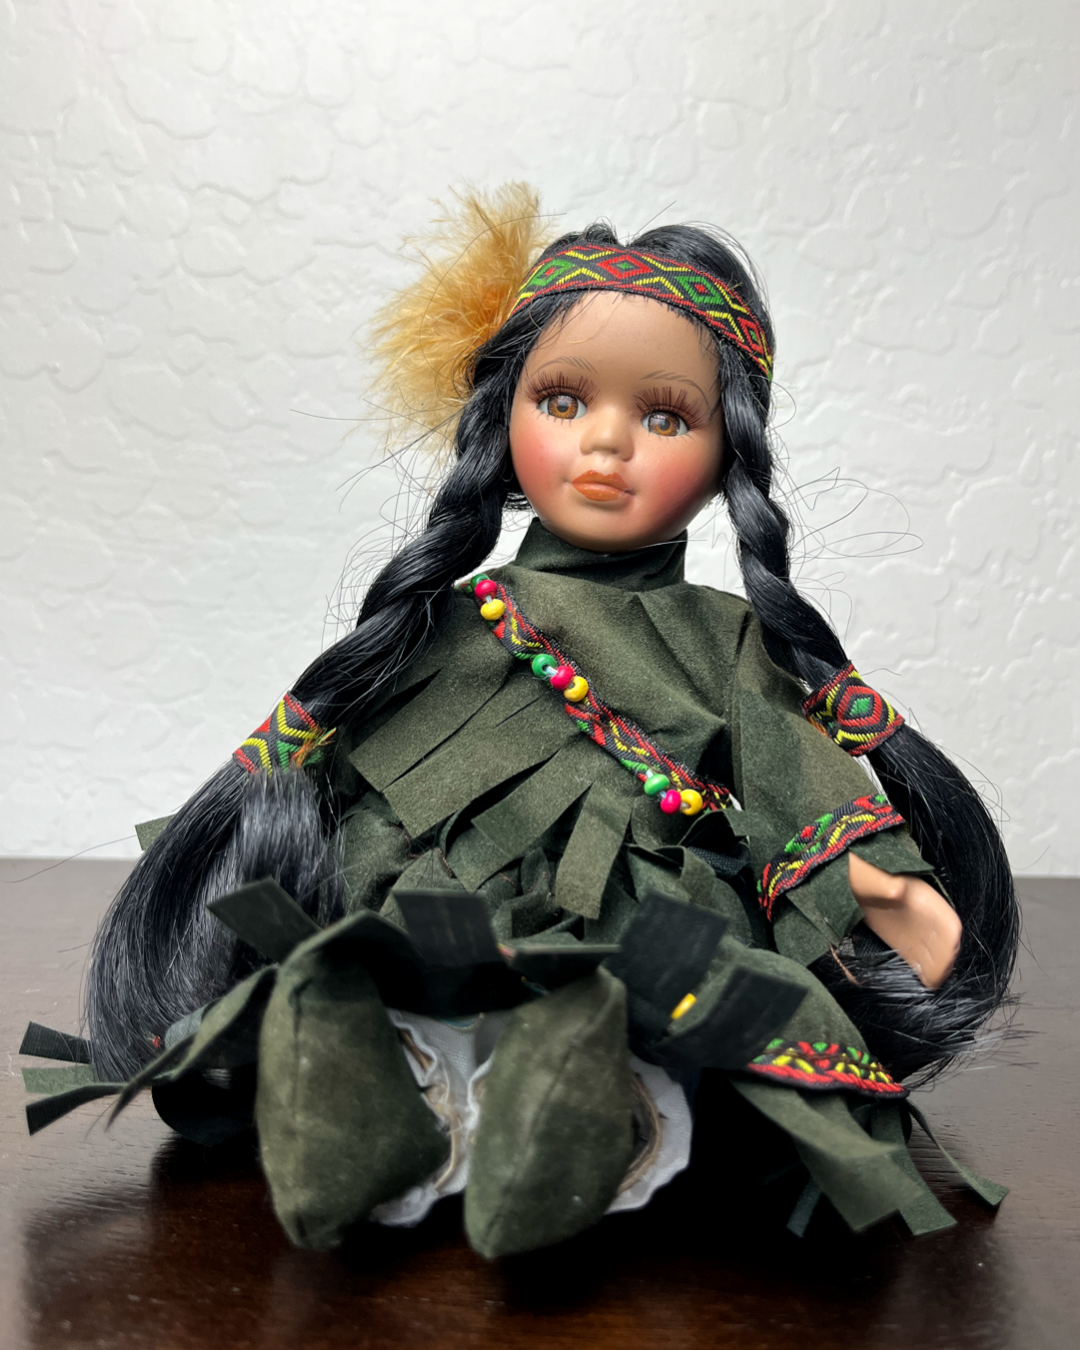 Vintage Cathay Doll in Traditional Native American Fringed Garb with Red, Green, and Yellow Embellishments - 8.5 inches